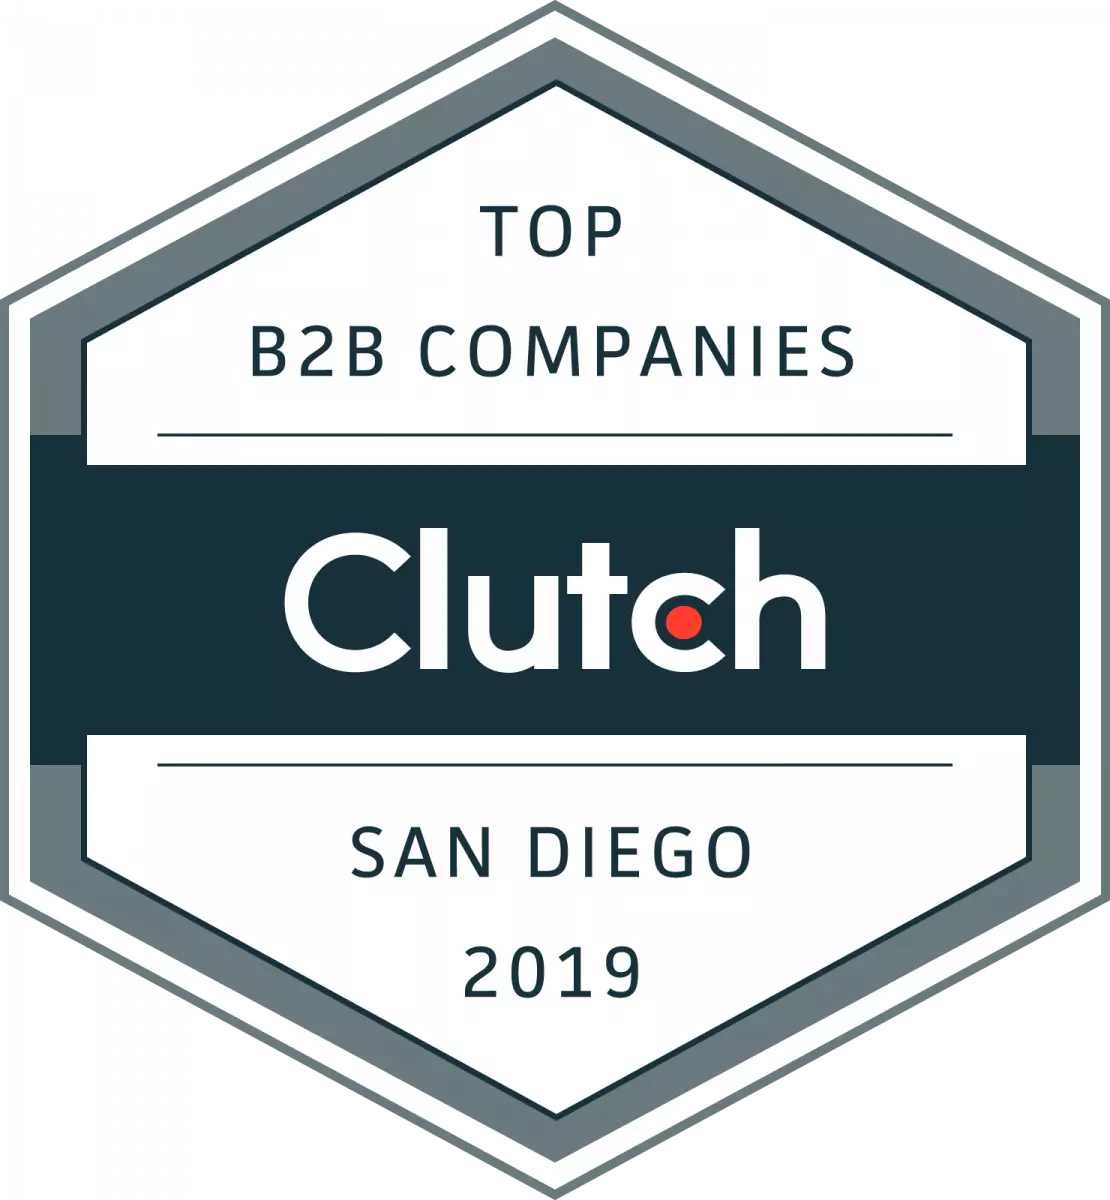 Named in Top 20 B2B Companies in San Diego
As a key marketing agency for startups and consumer brands across the U.S., HypeLife Brands is honored to be recognized as a Top 20 regional player by Clutch for San Diego.
etc